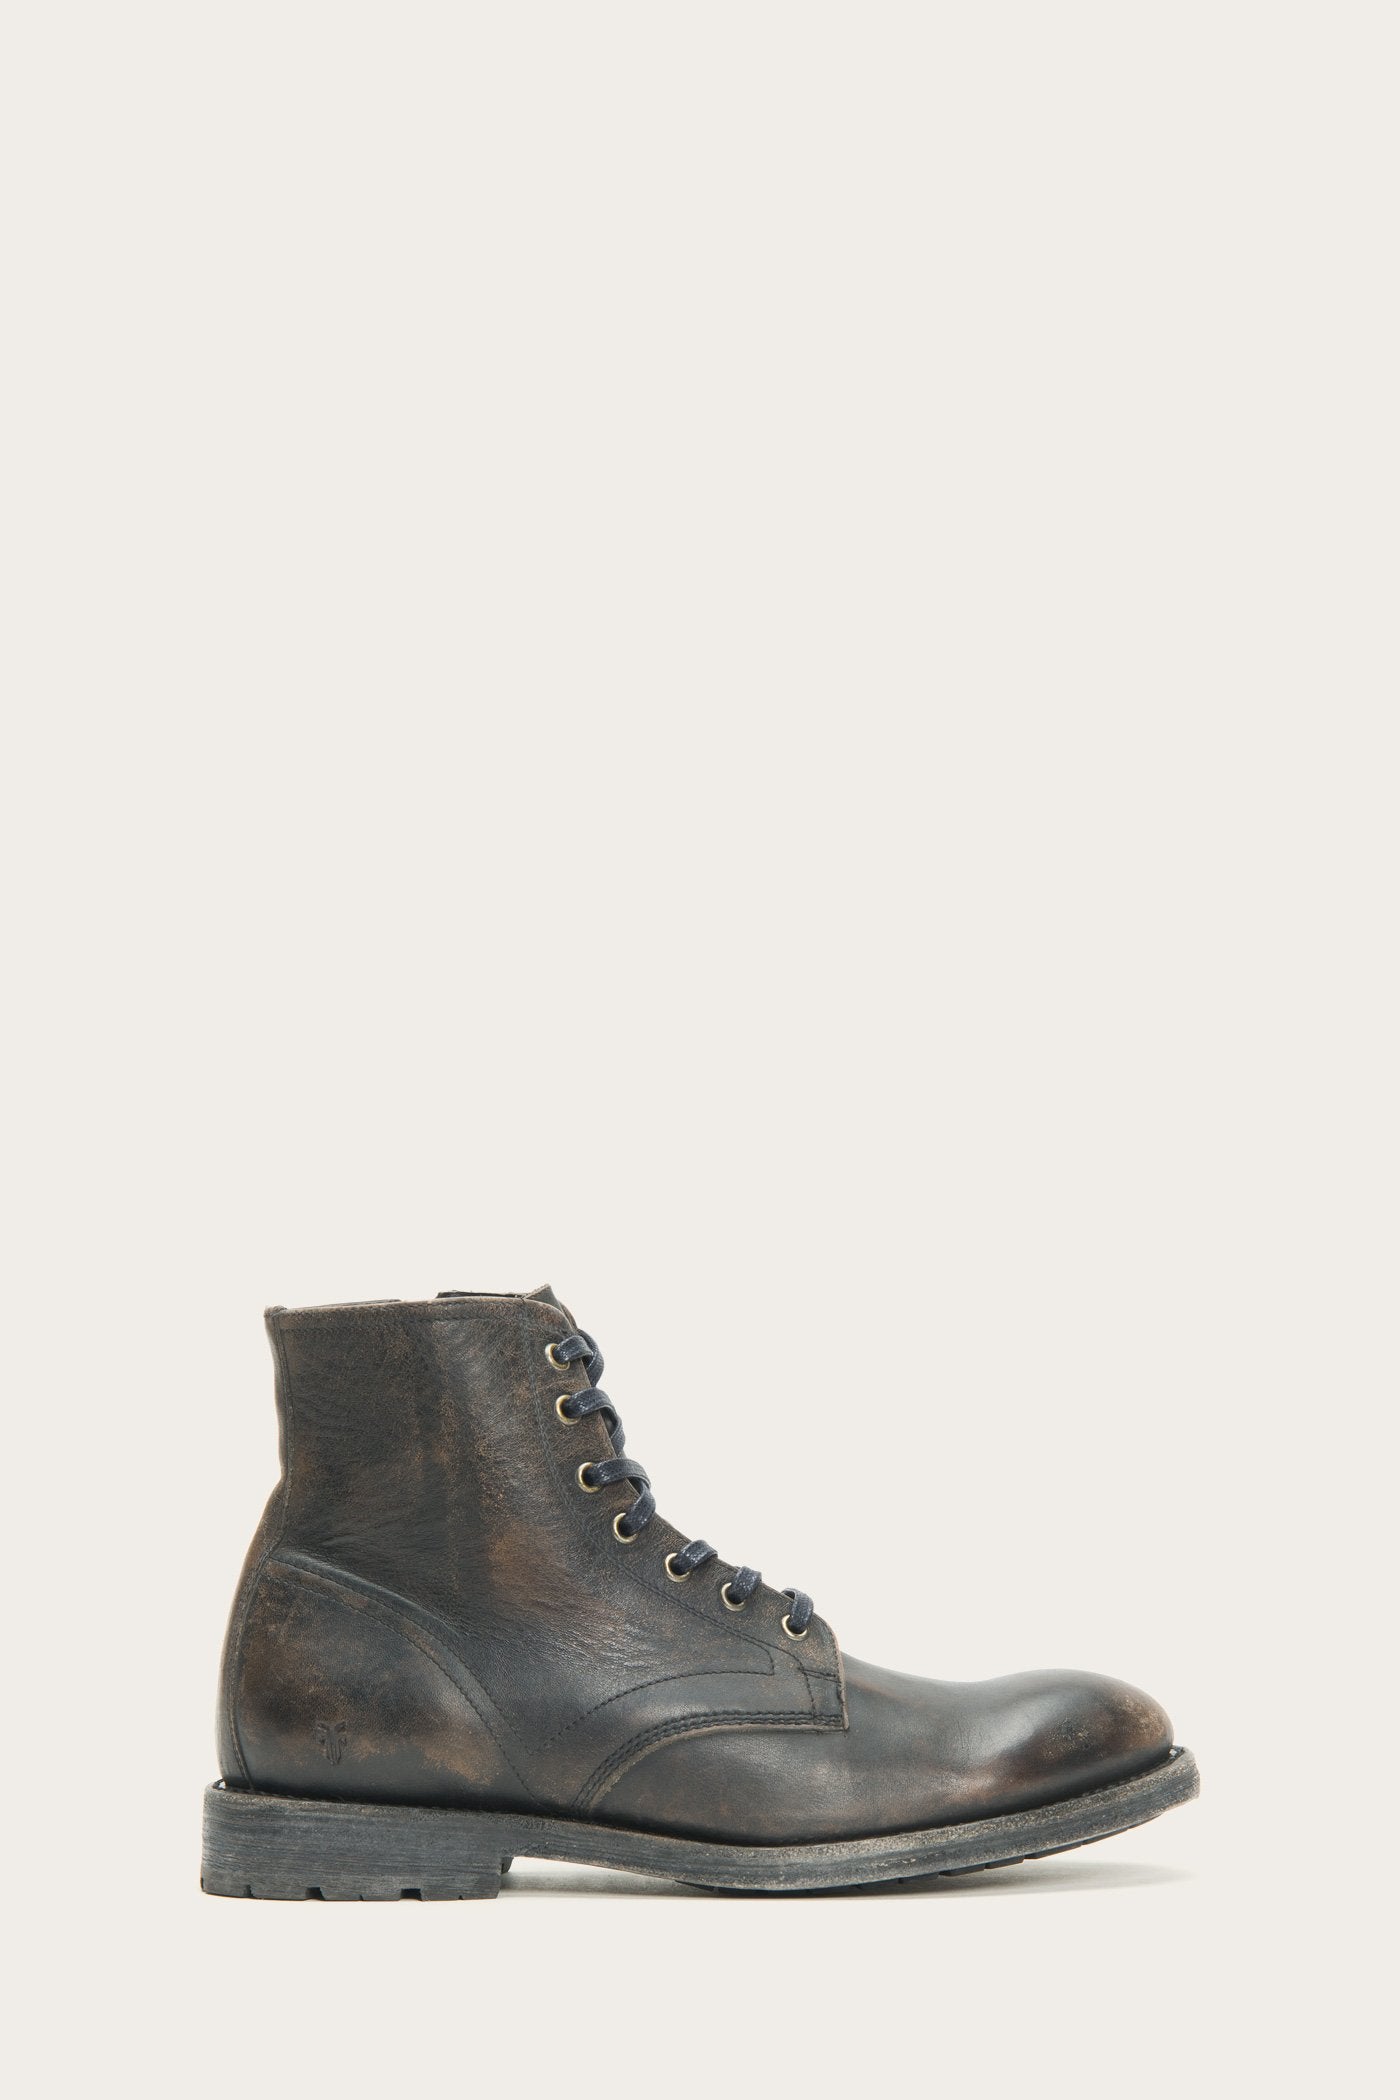 FRYE Boots, Sneakers, Shoes for Men and 